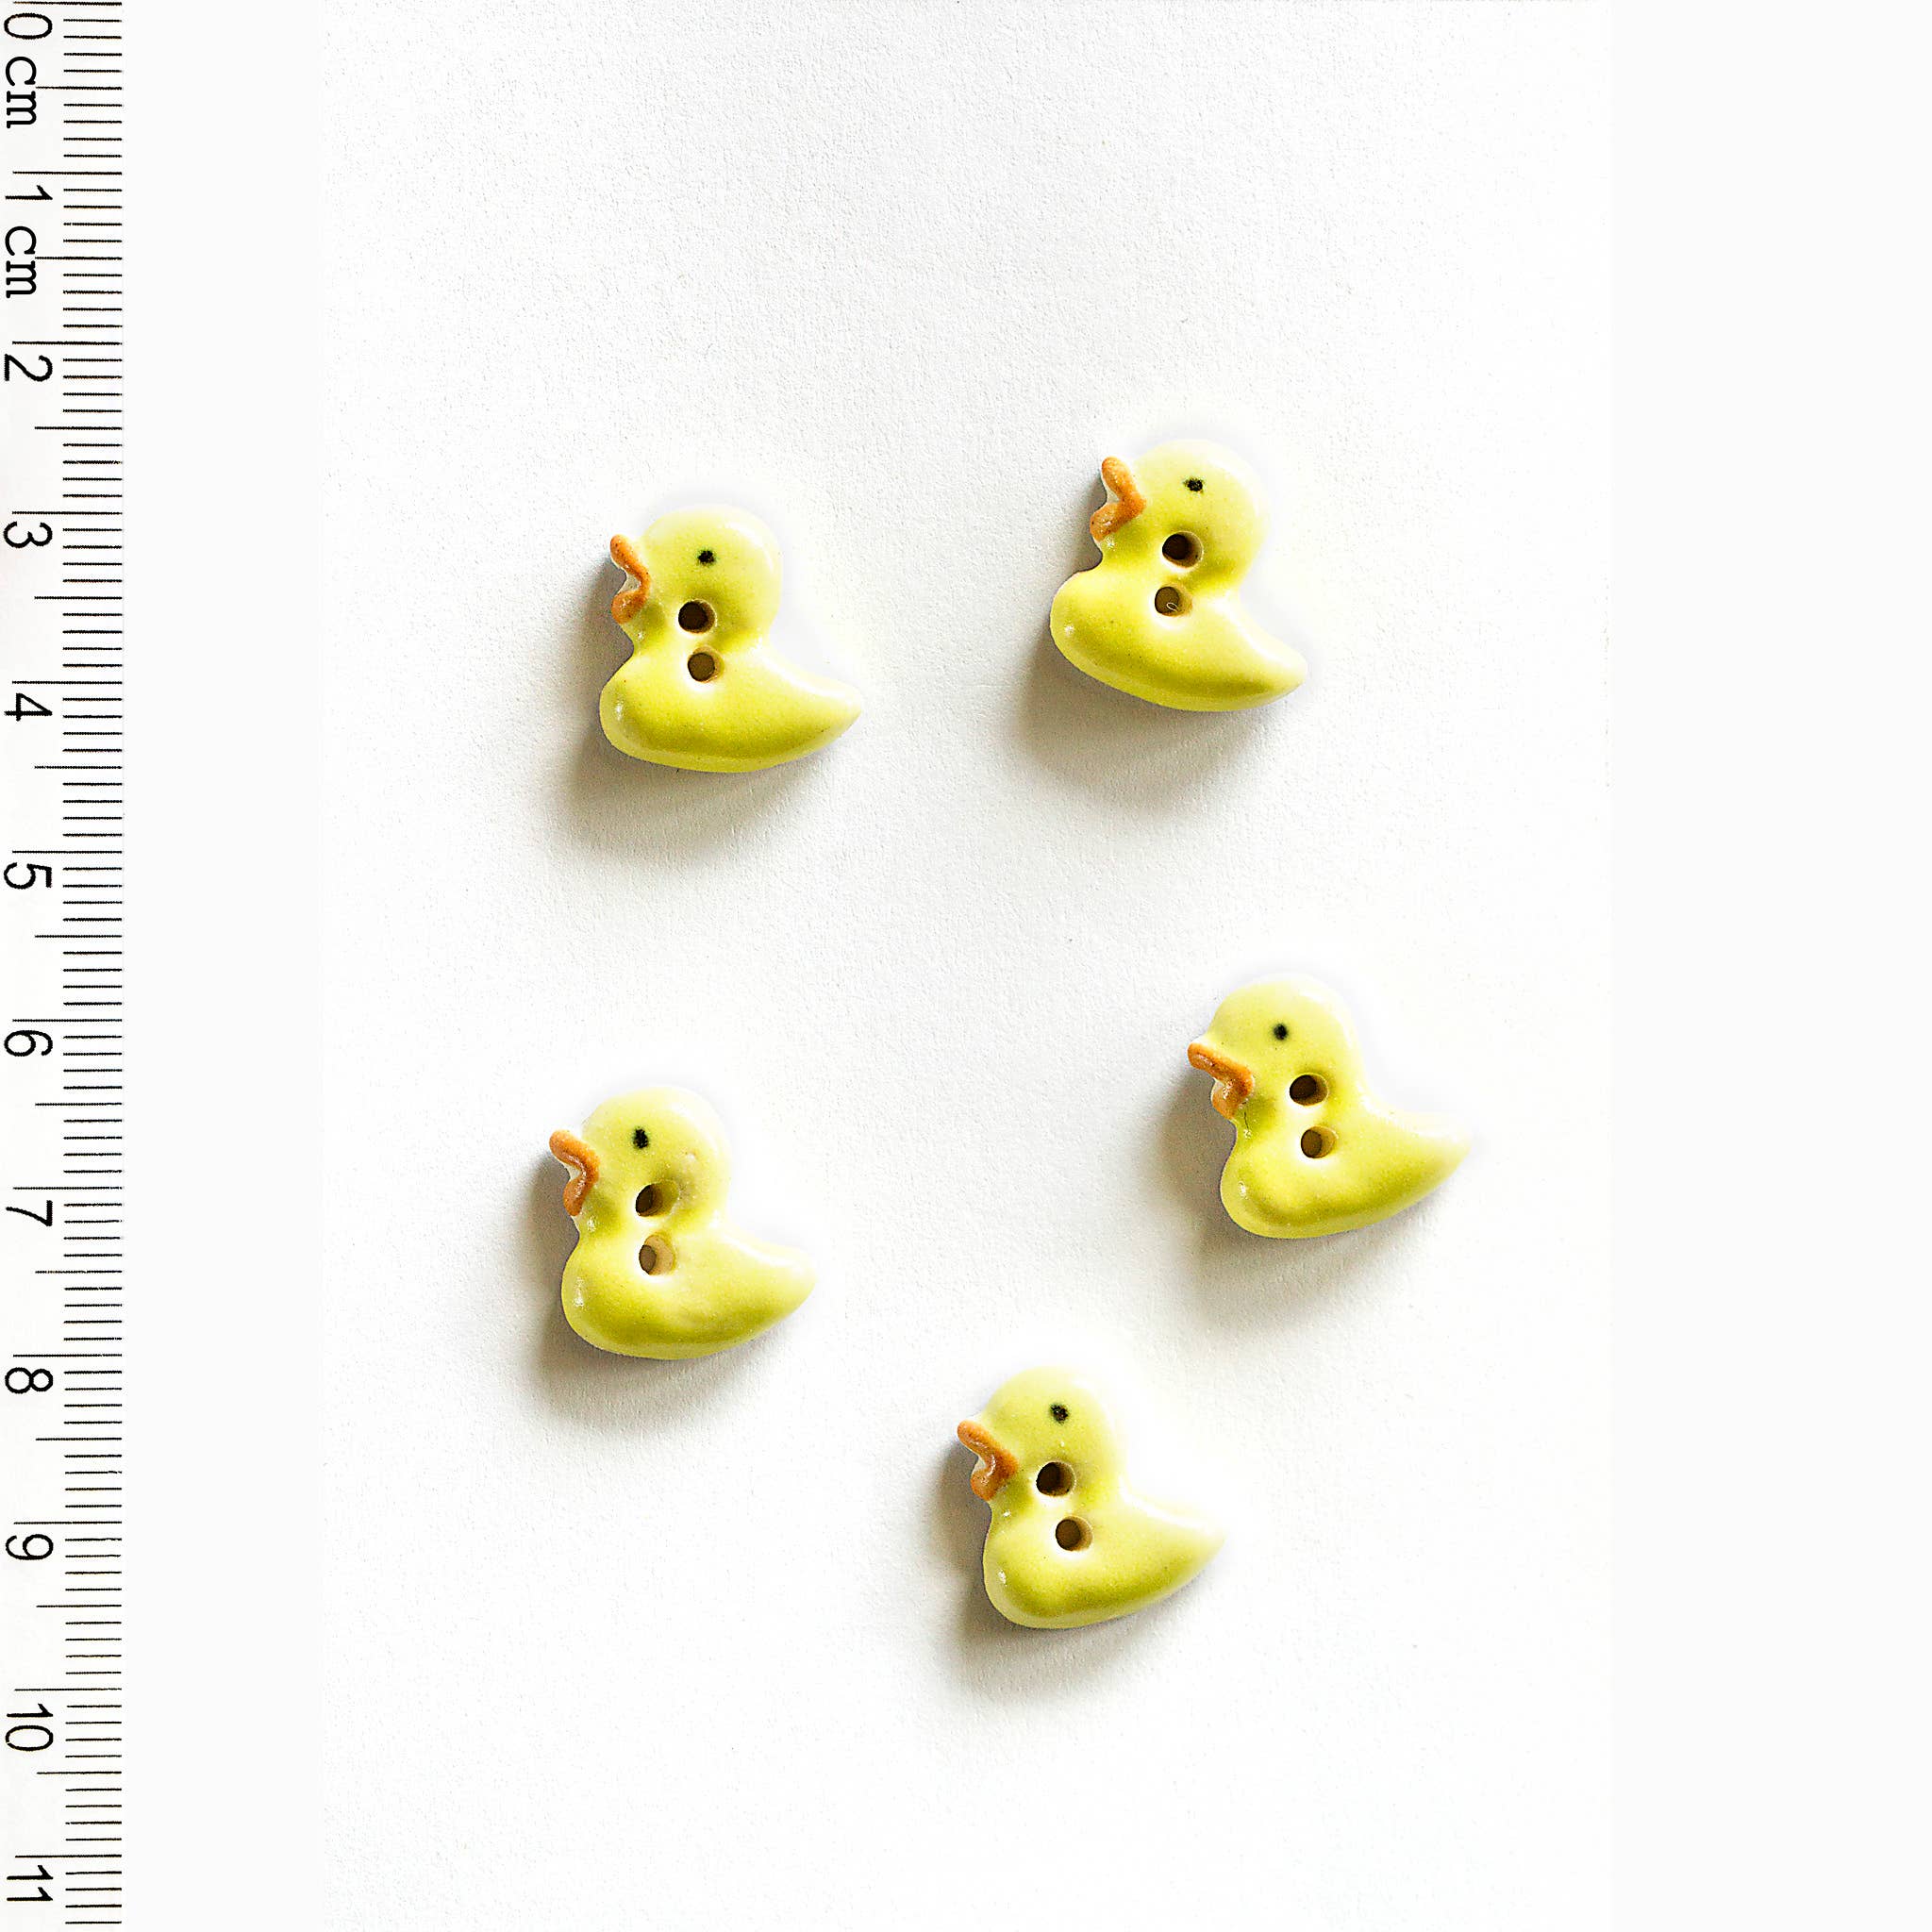 Incomparable Buttons - 5 Yellow Duckling Buttons